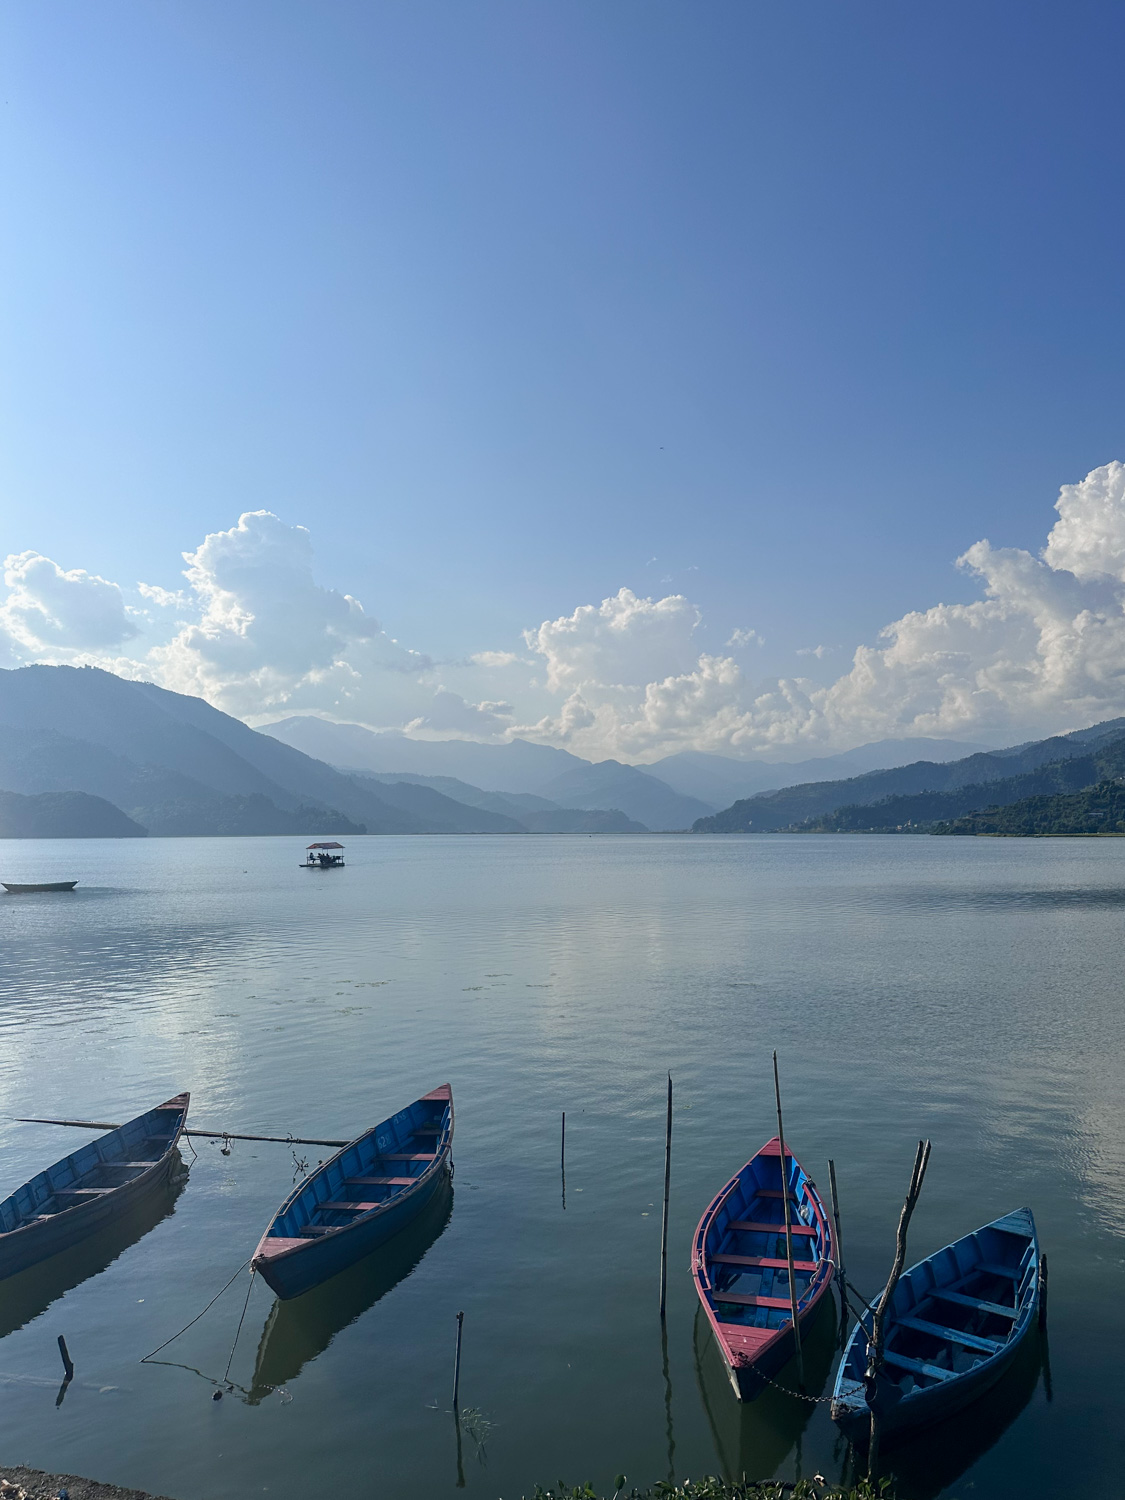 A visit to Pokhara is a must on any trip to Nepal